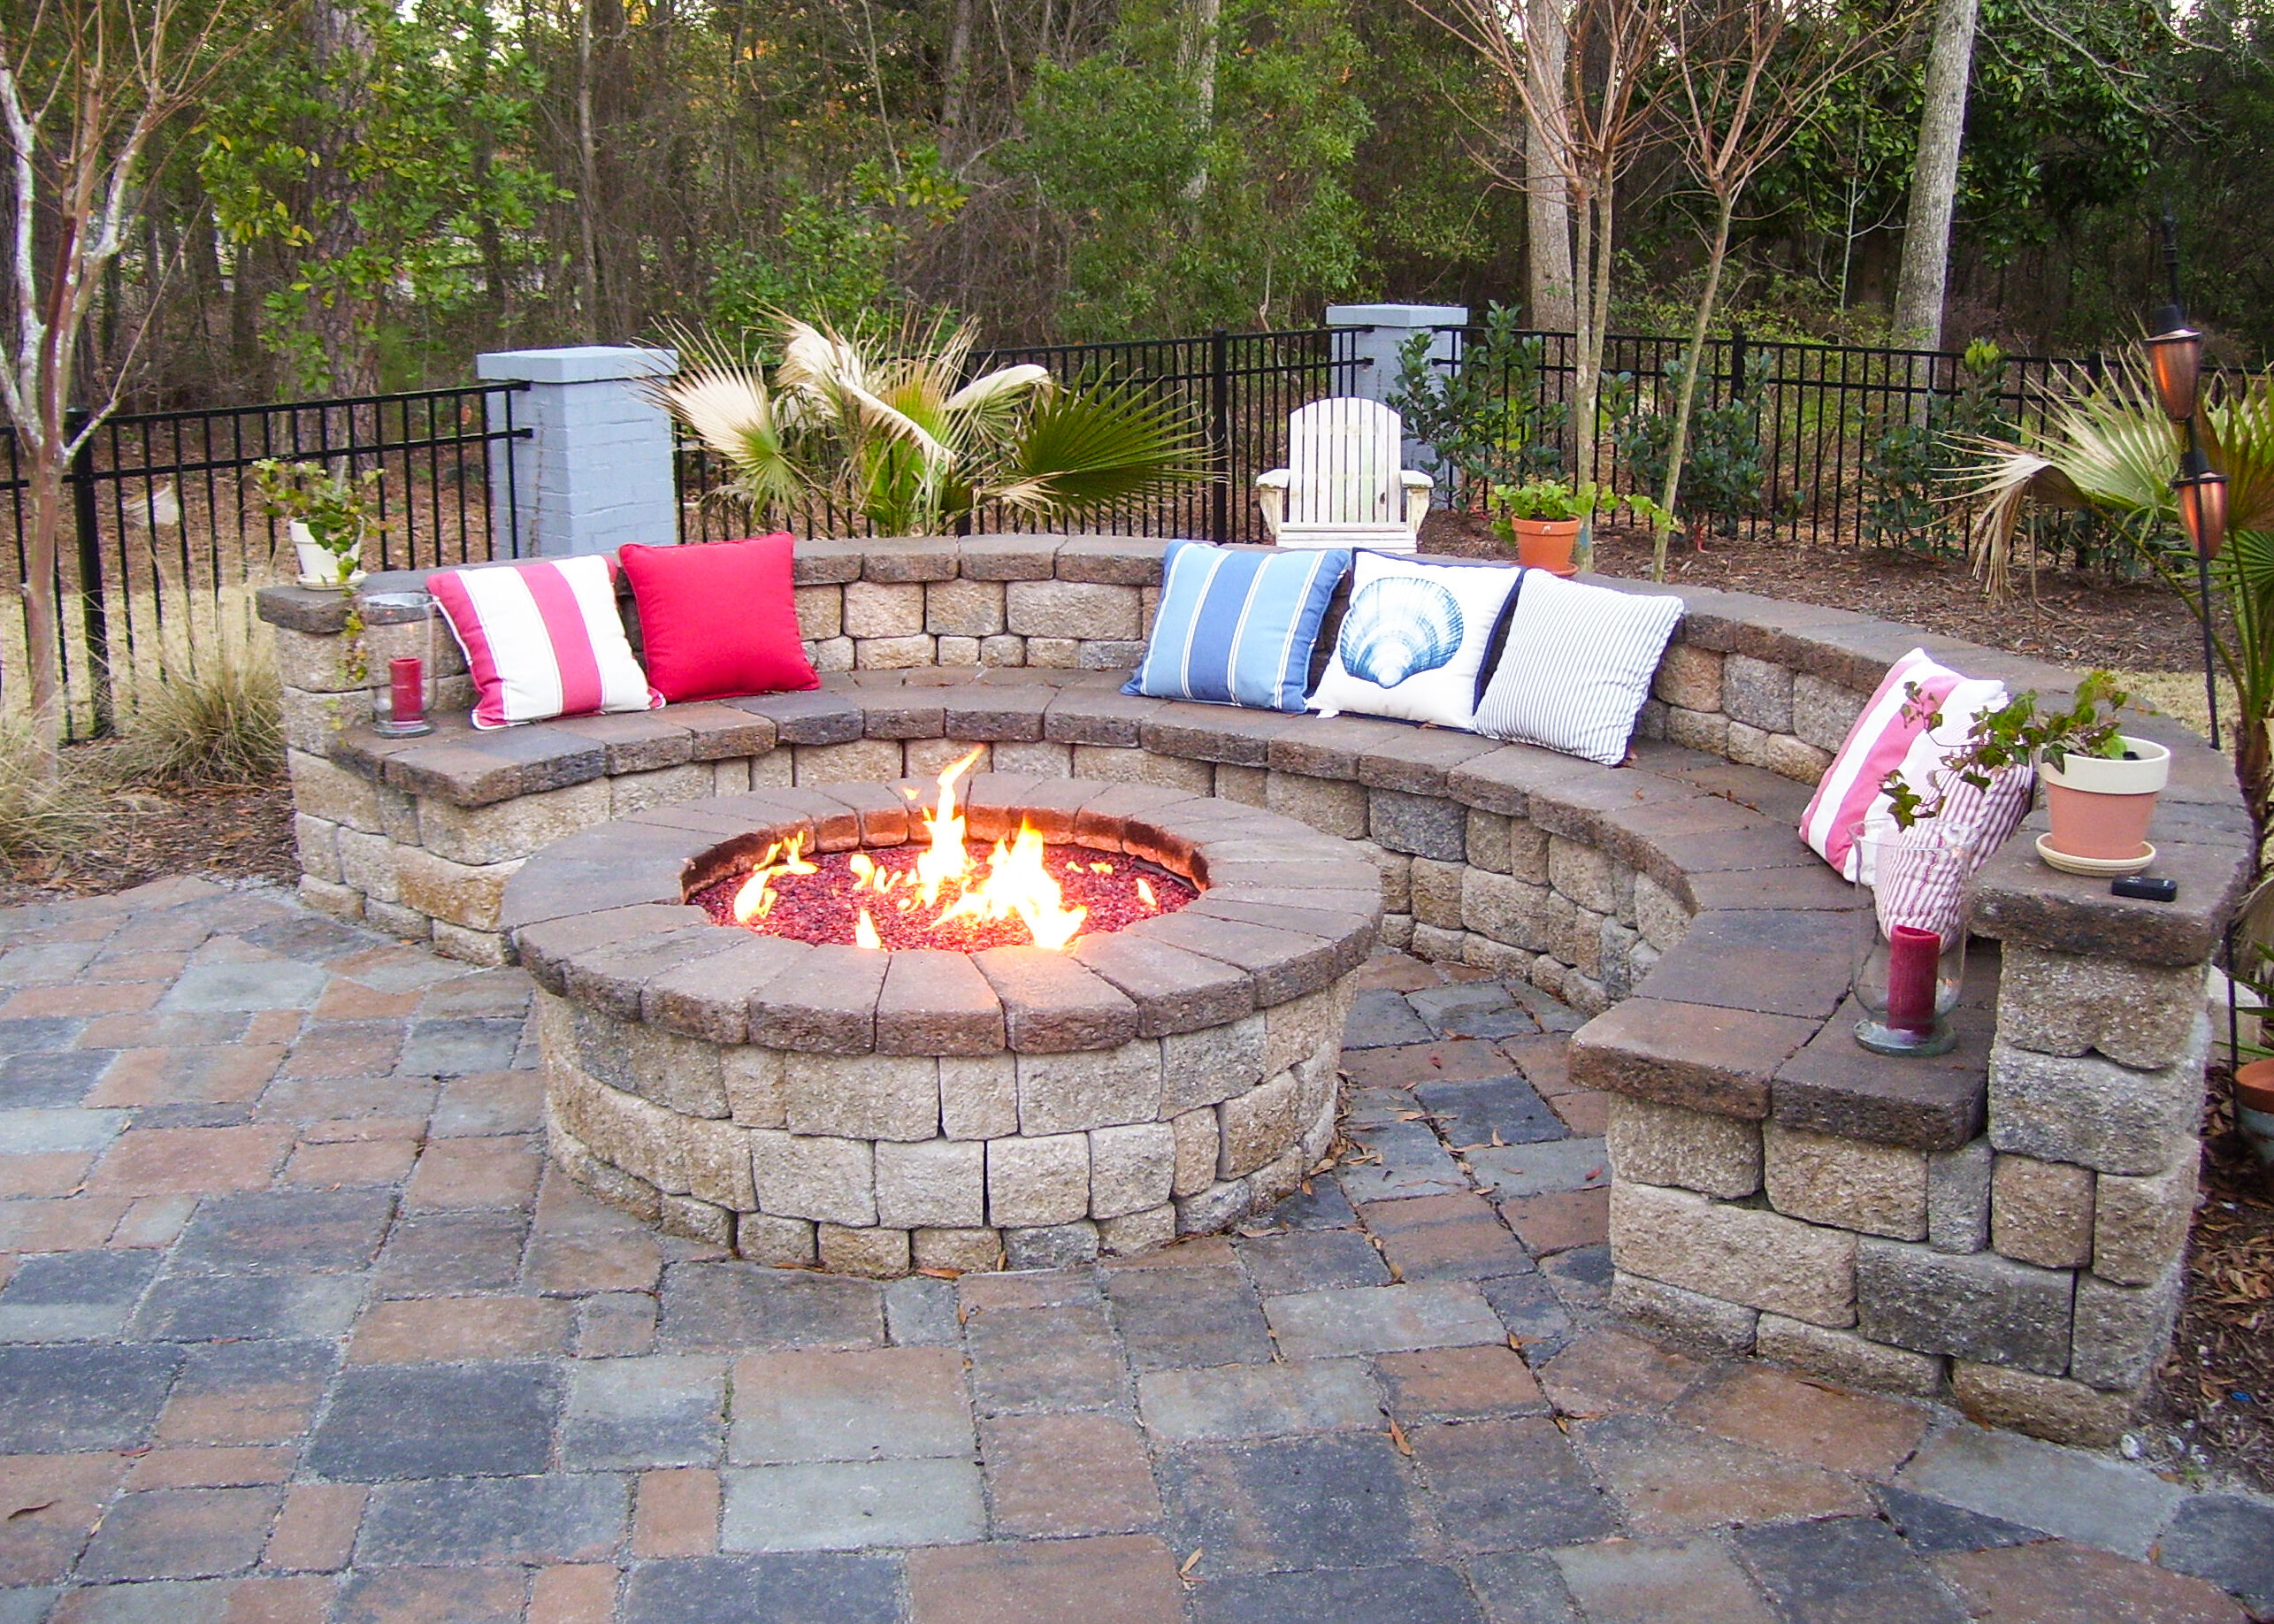 3 Easy Diy Fire Pit Ideas, How To Make Patio Fire Pit